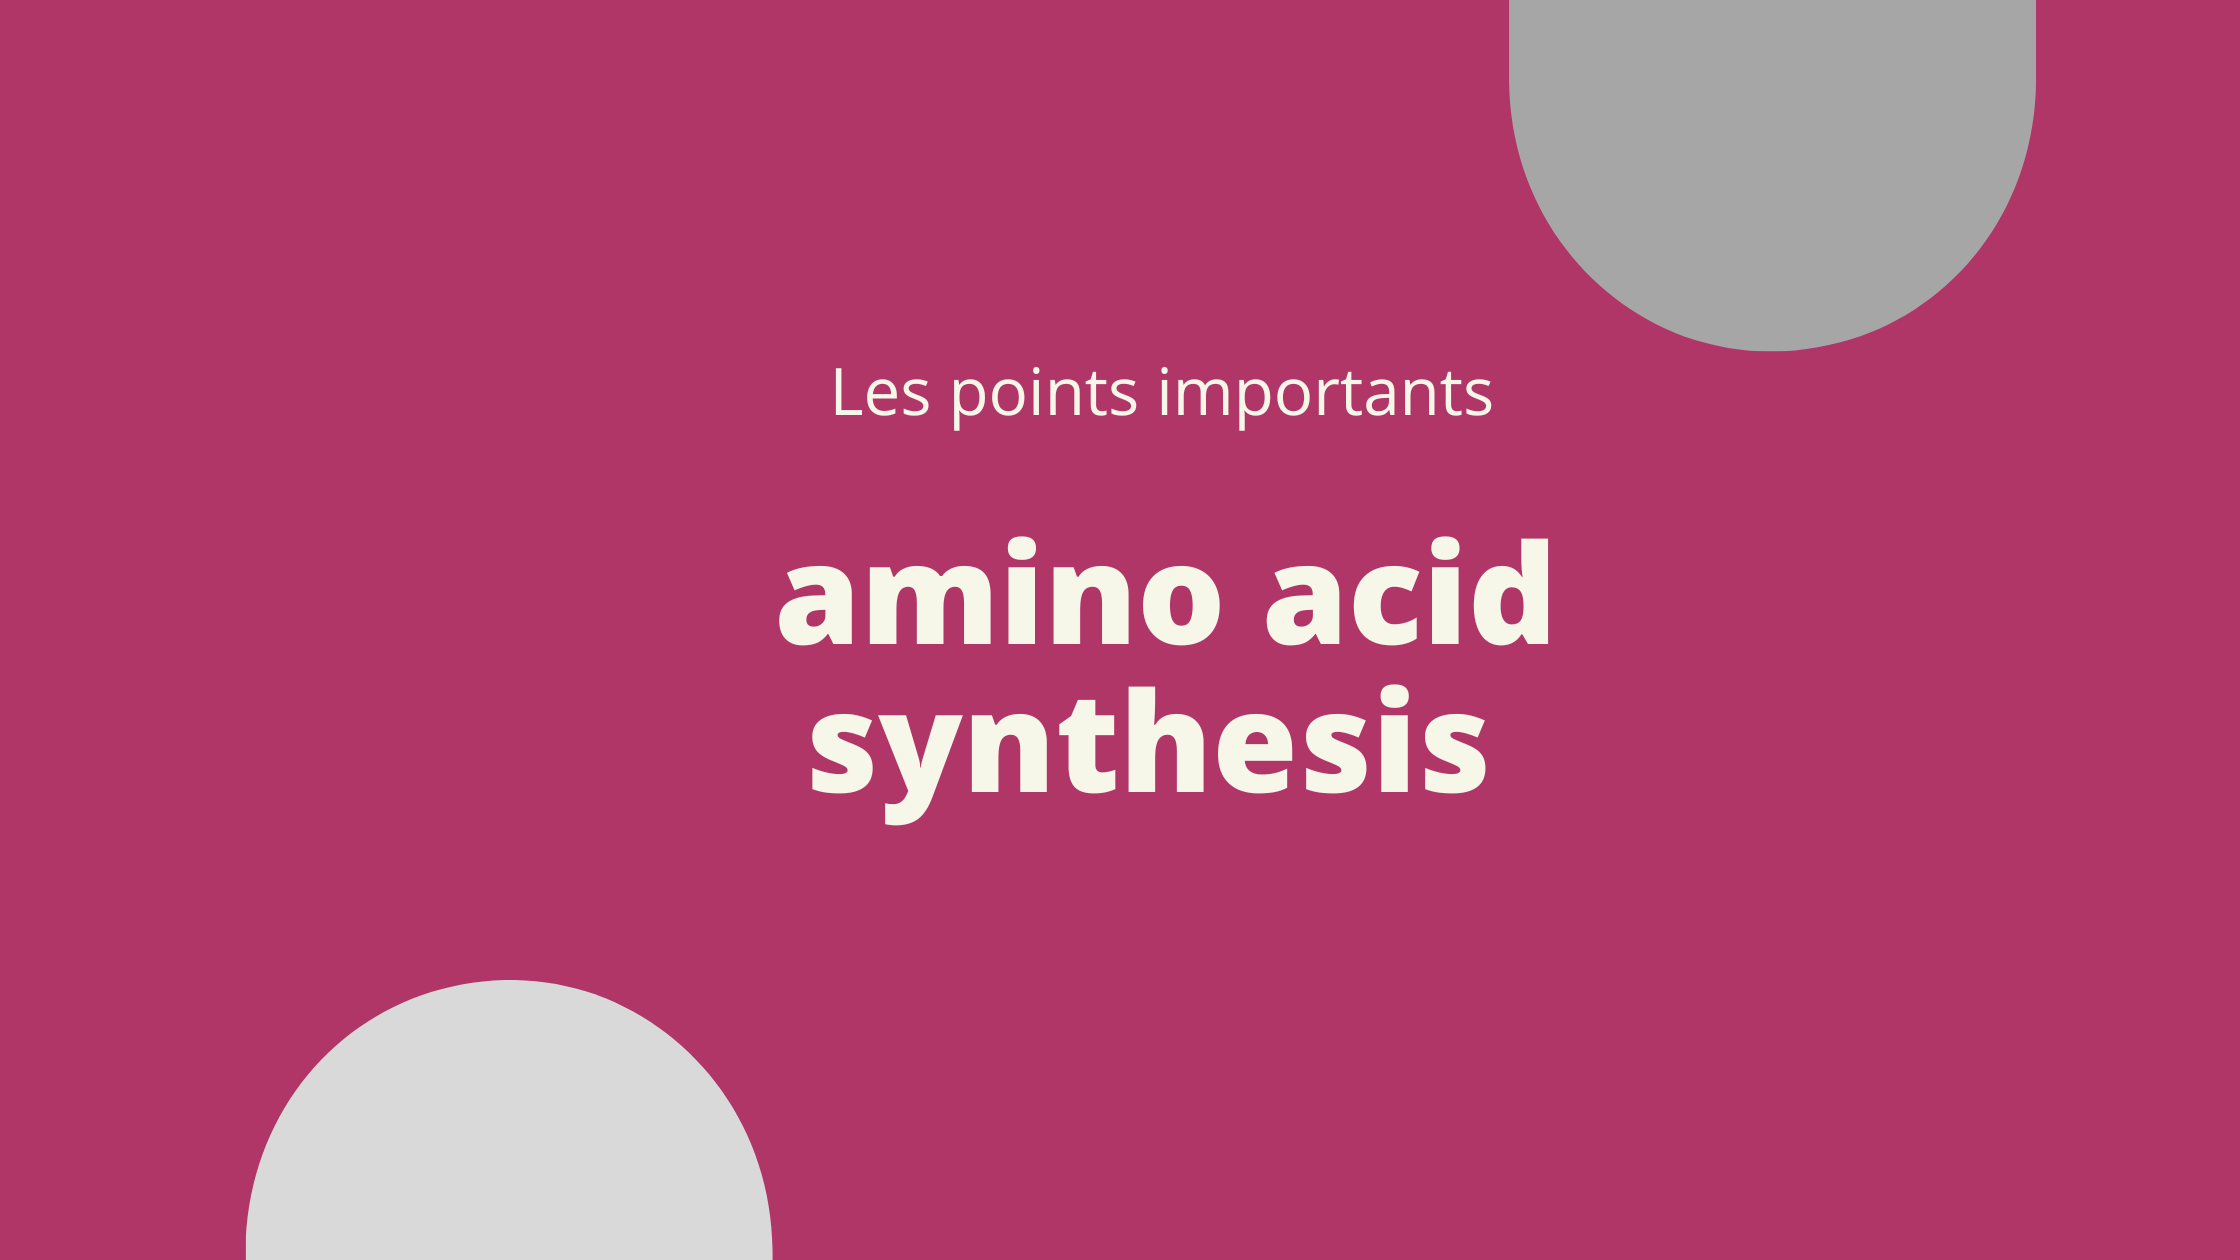 amino acid synthesis | Les points importants